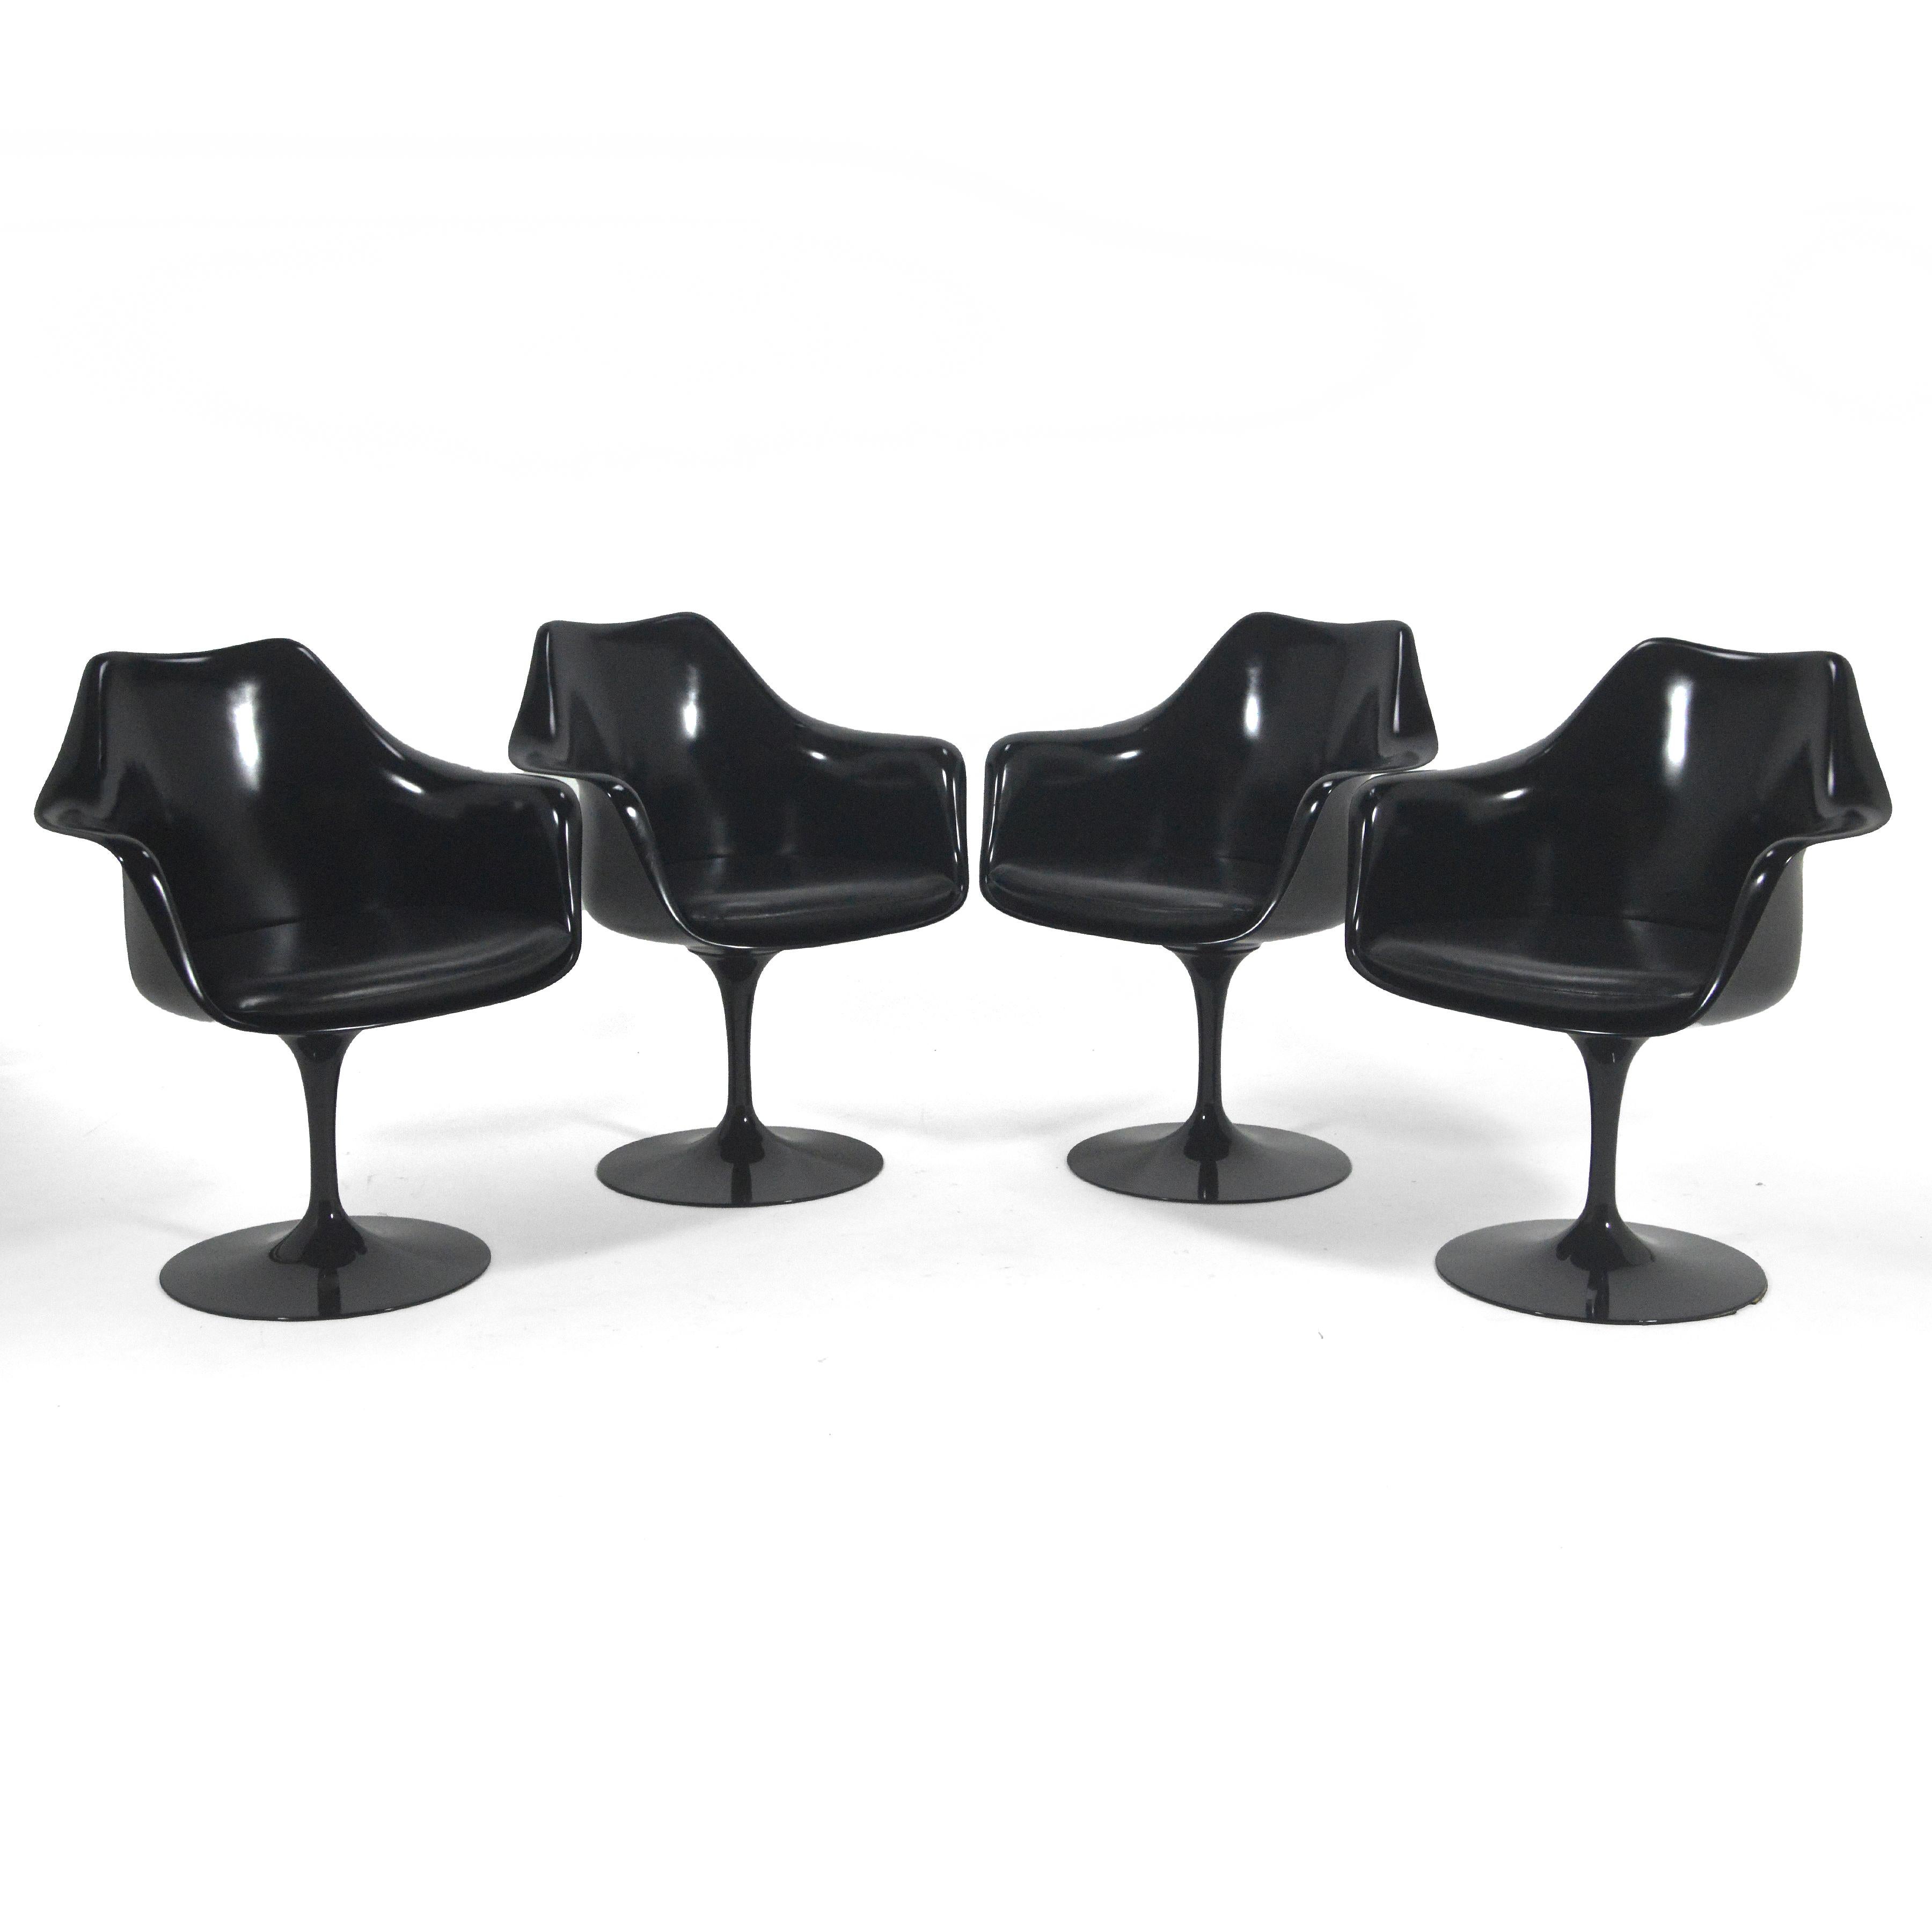 This Saarinen dining set is absolutely stunning. All dressed in black, the four armchairs with swivel function feature black faux leather seat cushions and comes with a matching black mica top table.

Saarinen's iconic design is given even greater